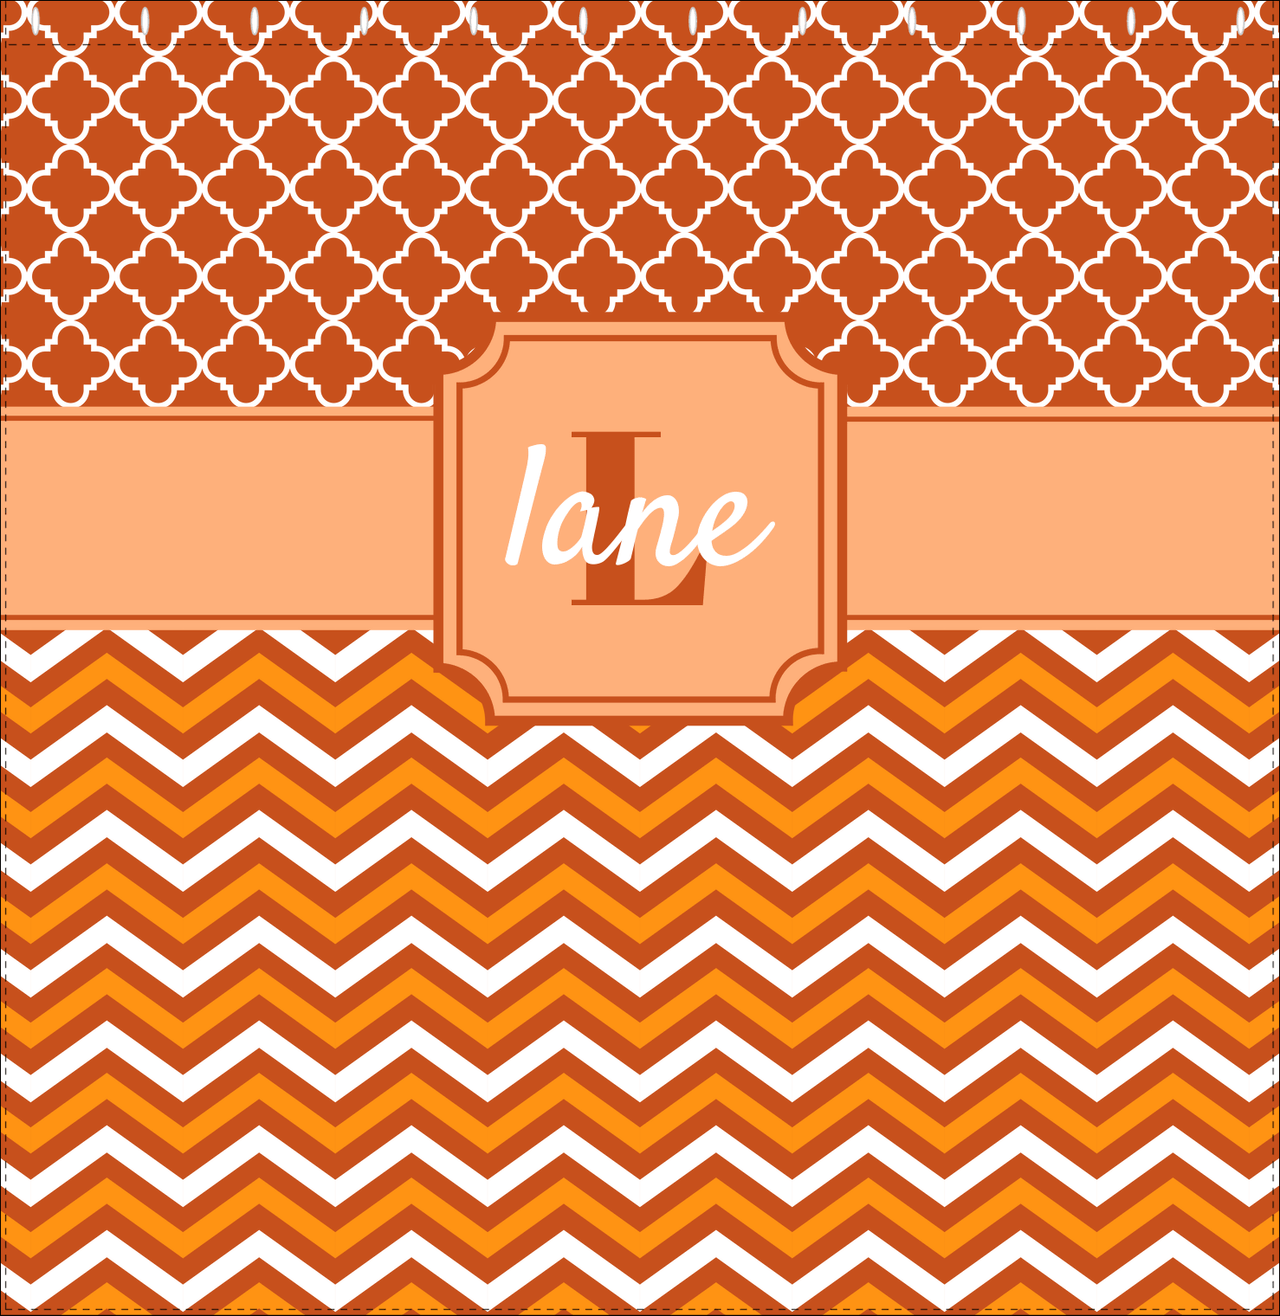 Personalized Quatrefoil and Chevron II Shower Curtain - Orange and White - Stamp Nameplate - Decorate View